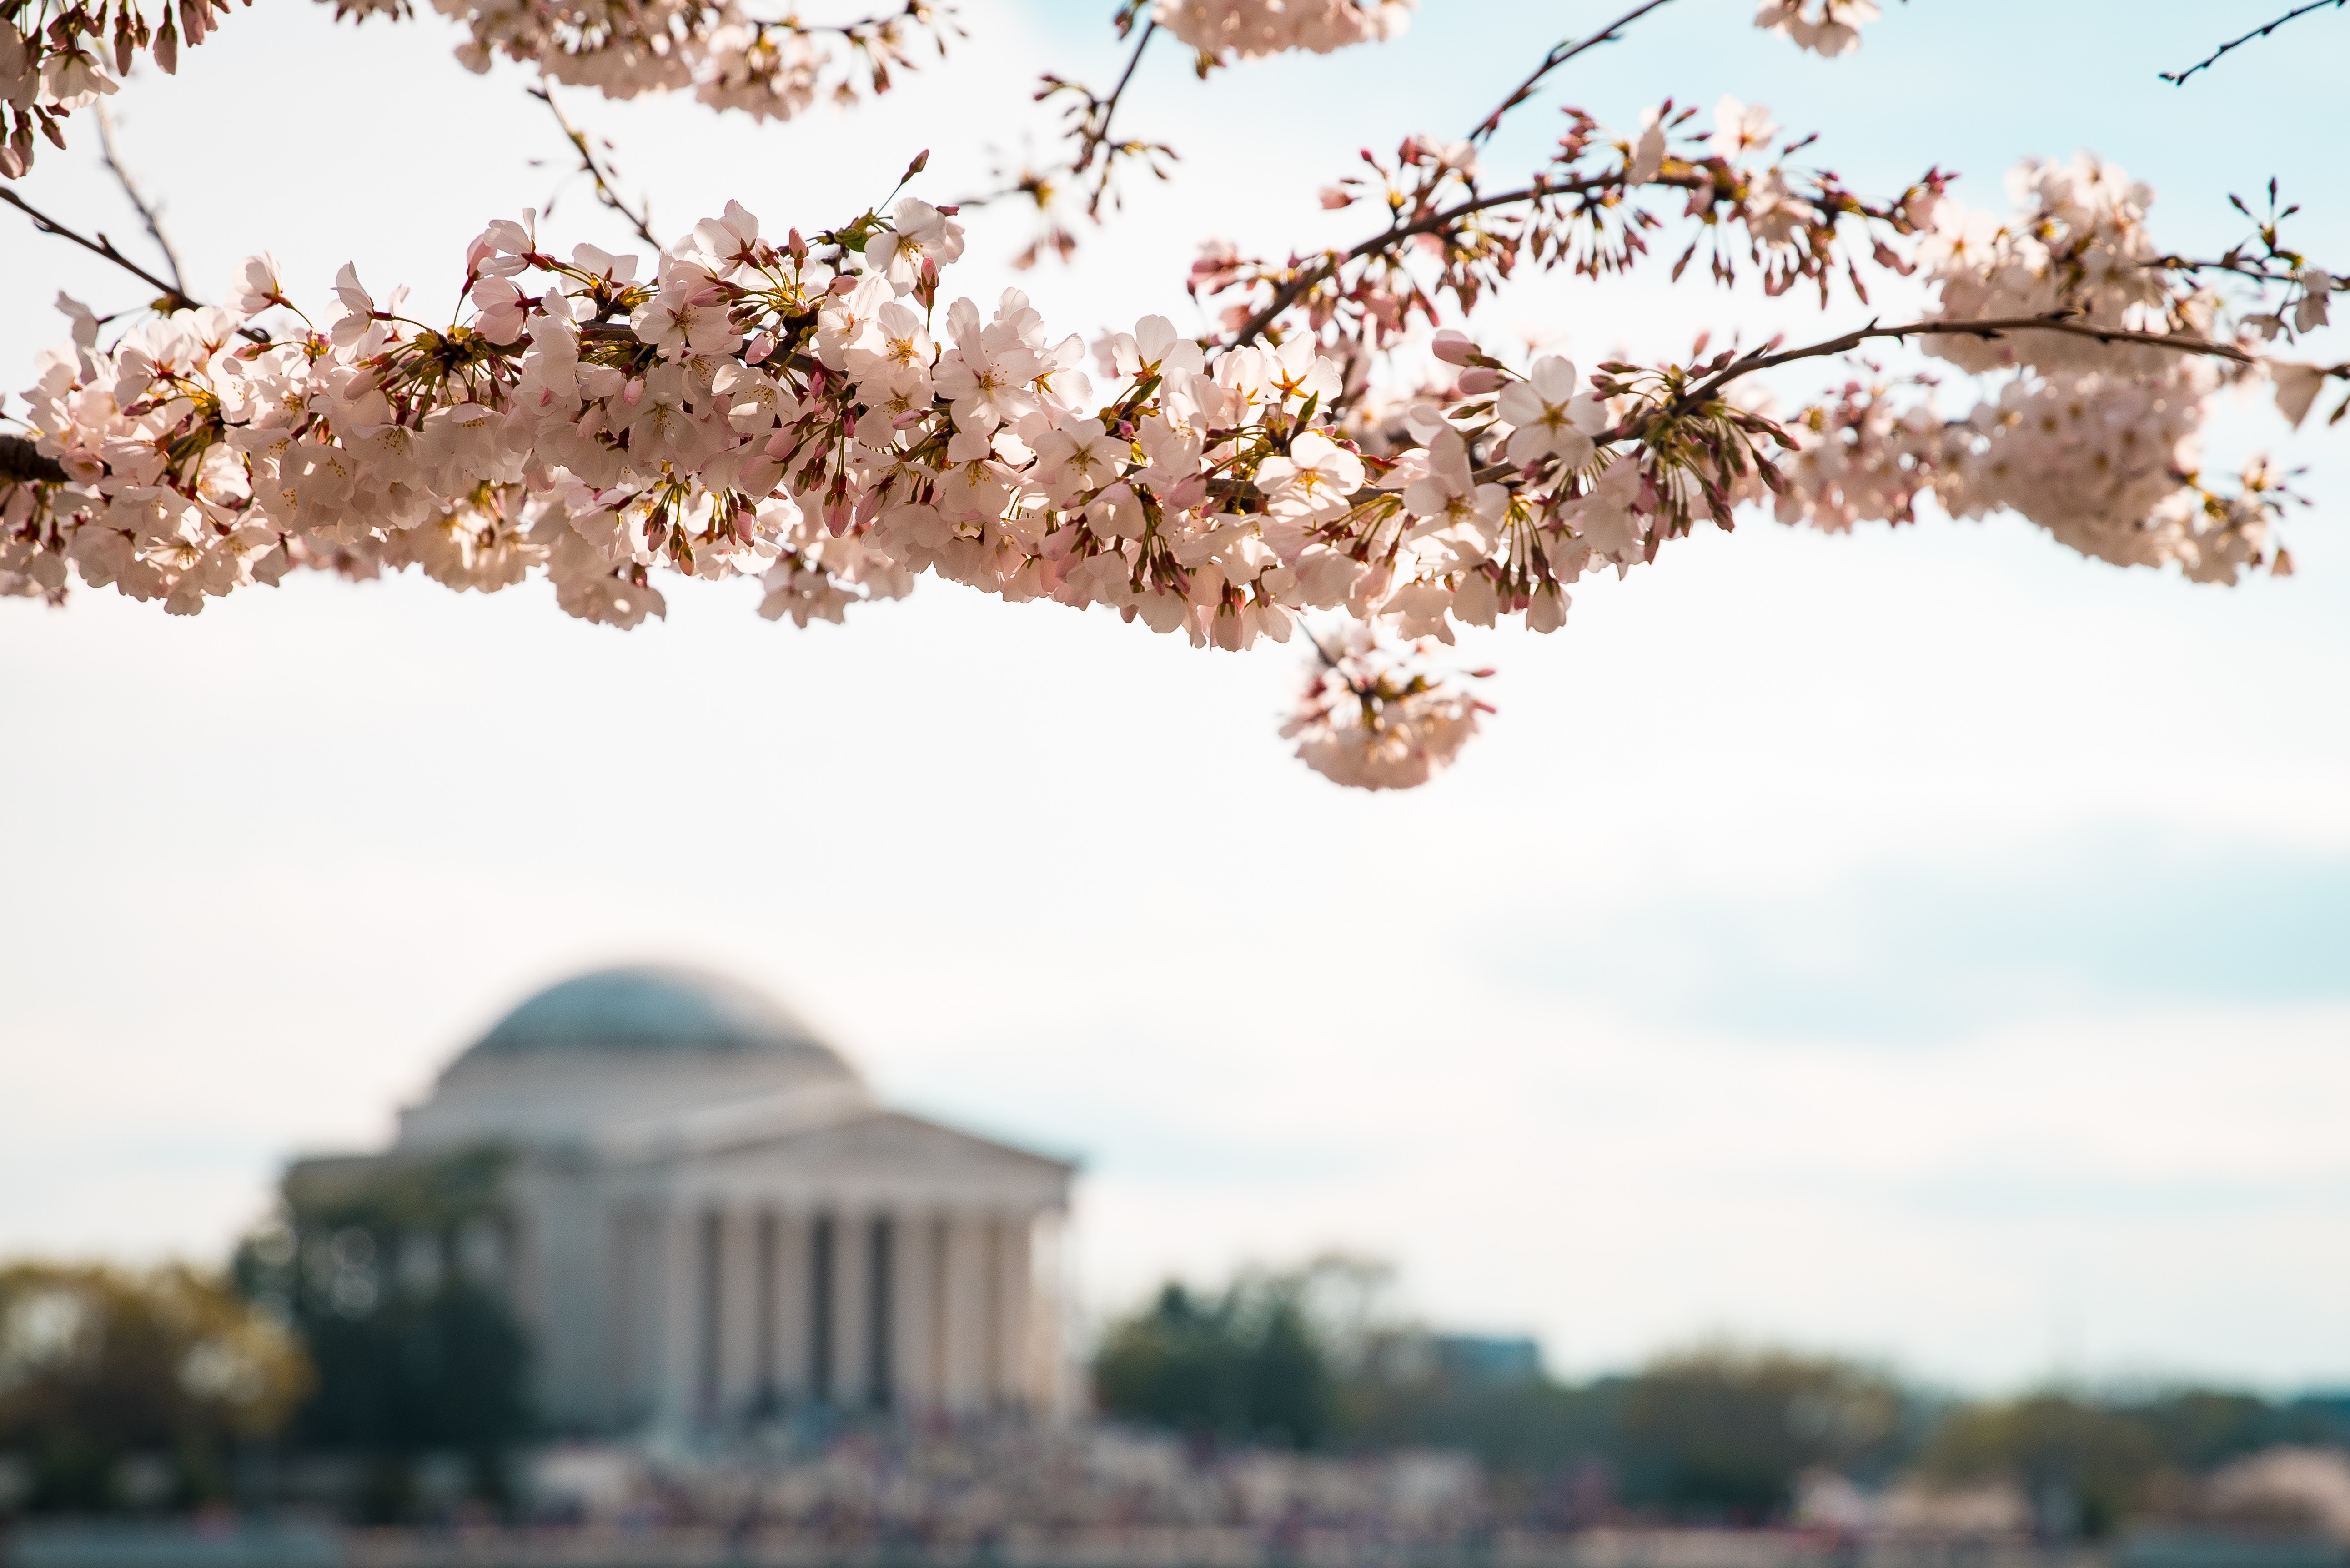 Wifi Free Places To Unplug in DC